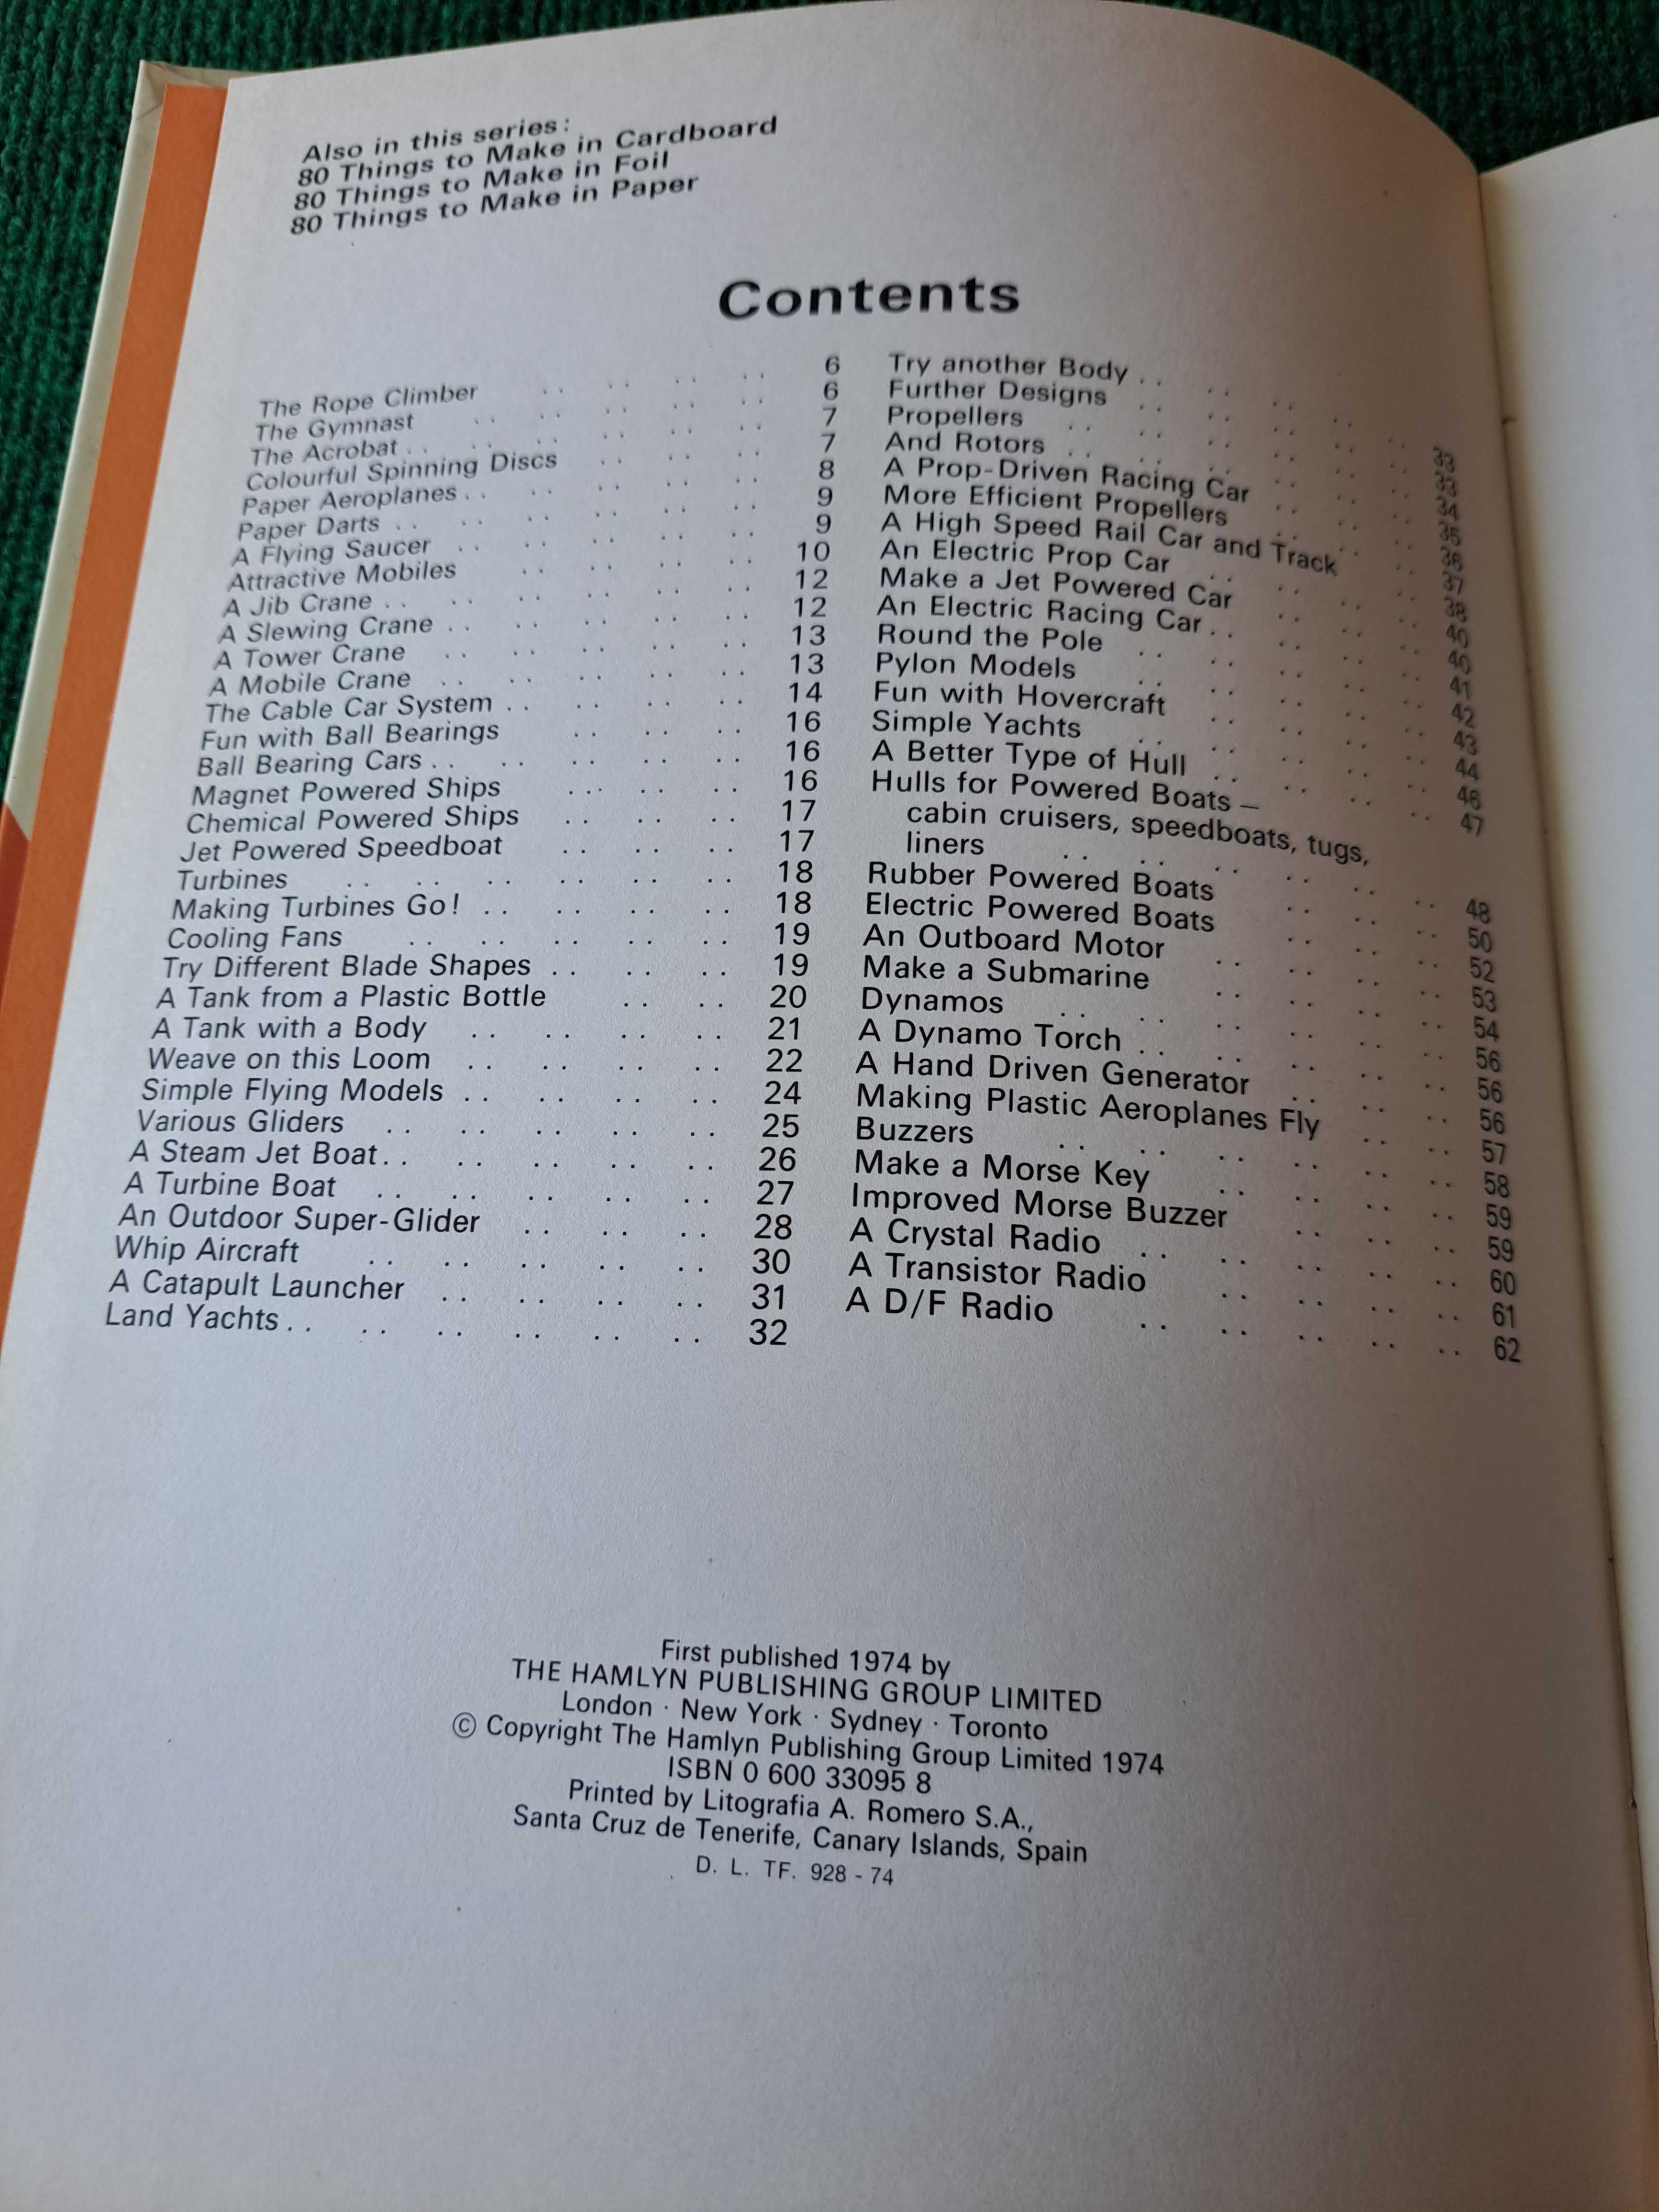 80 Things to make That Go - Ron Warring